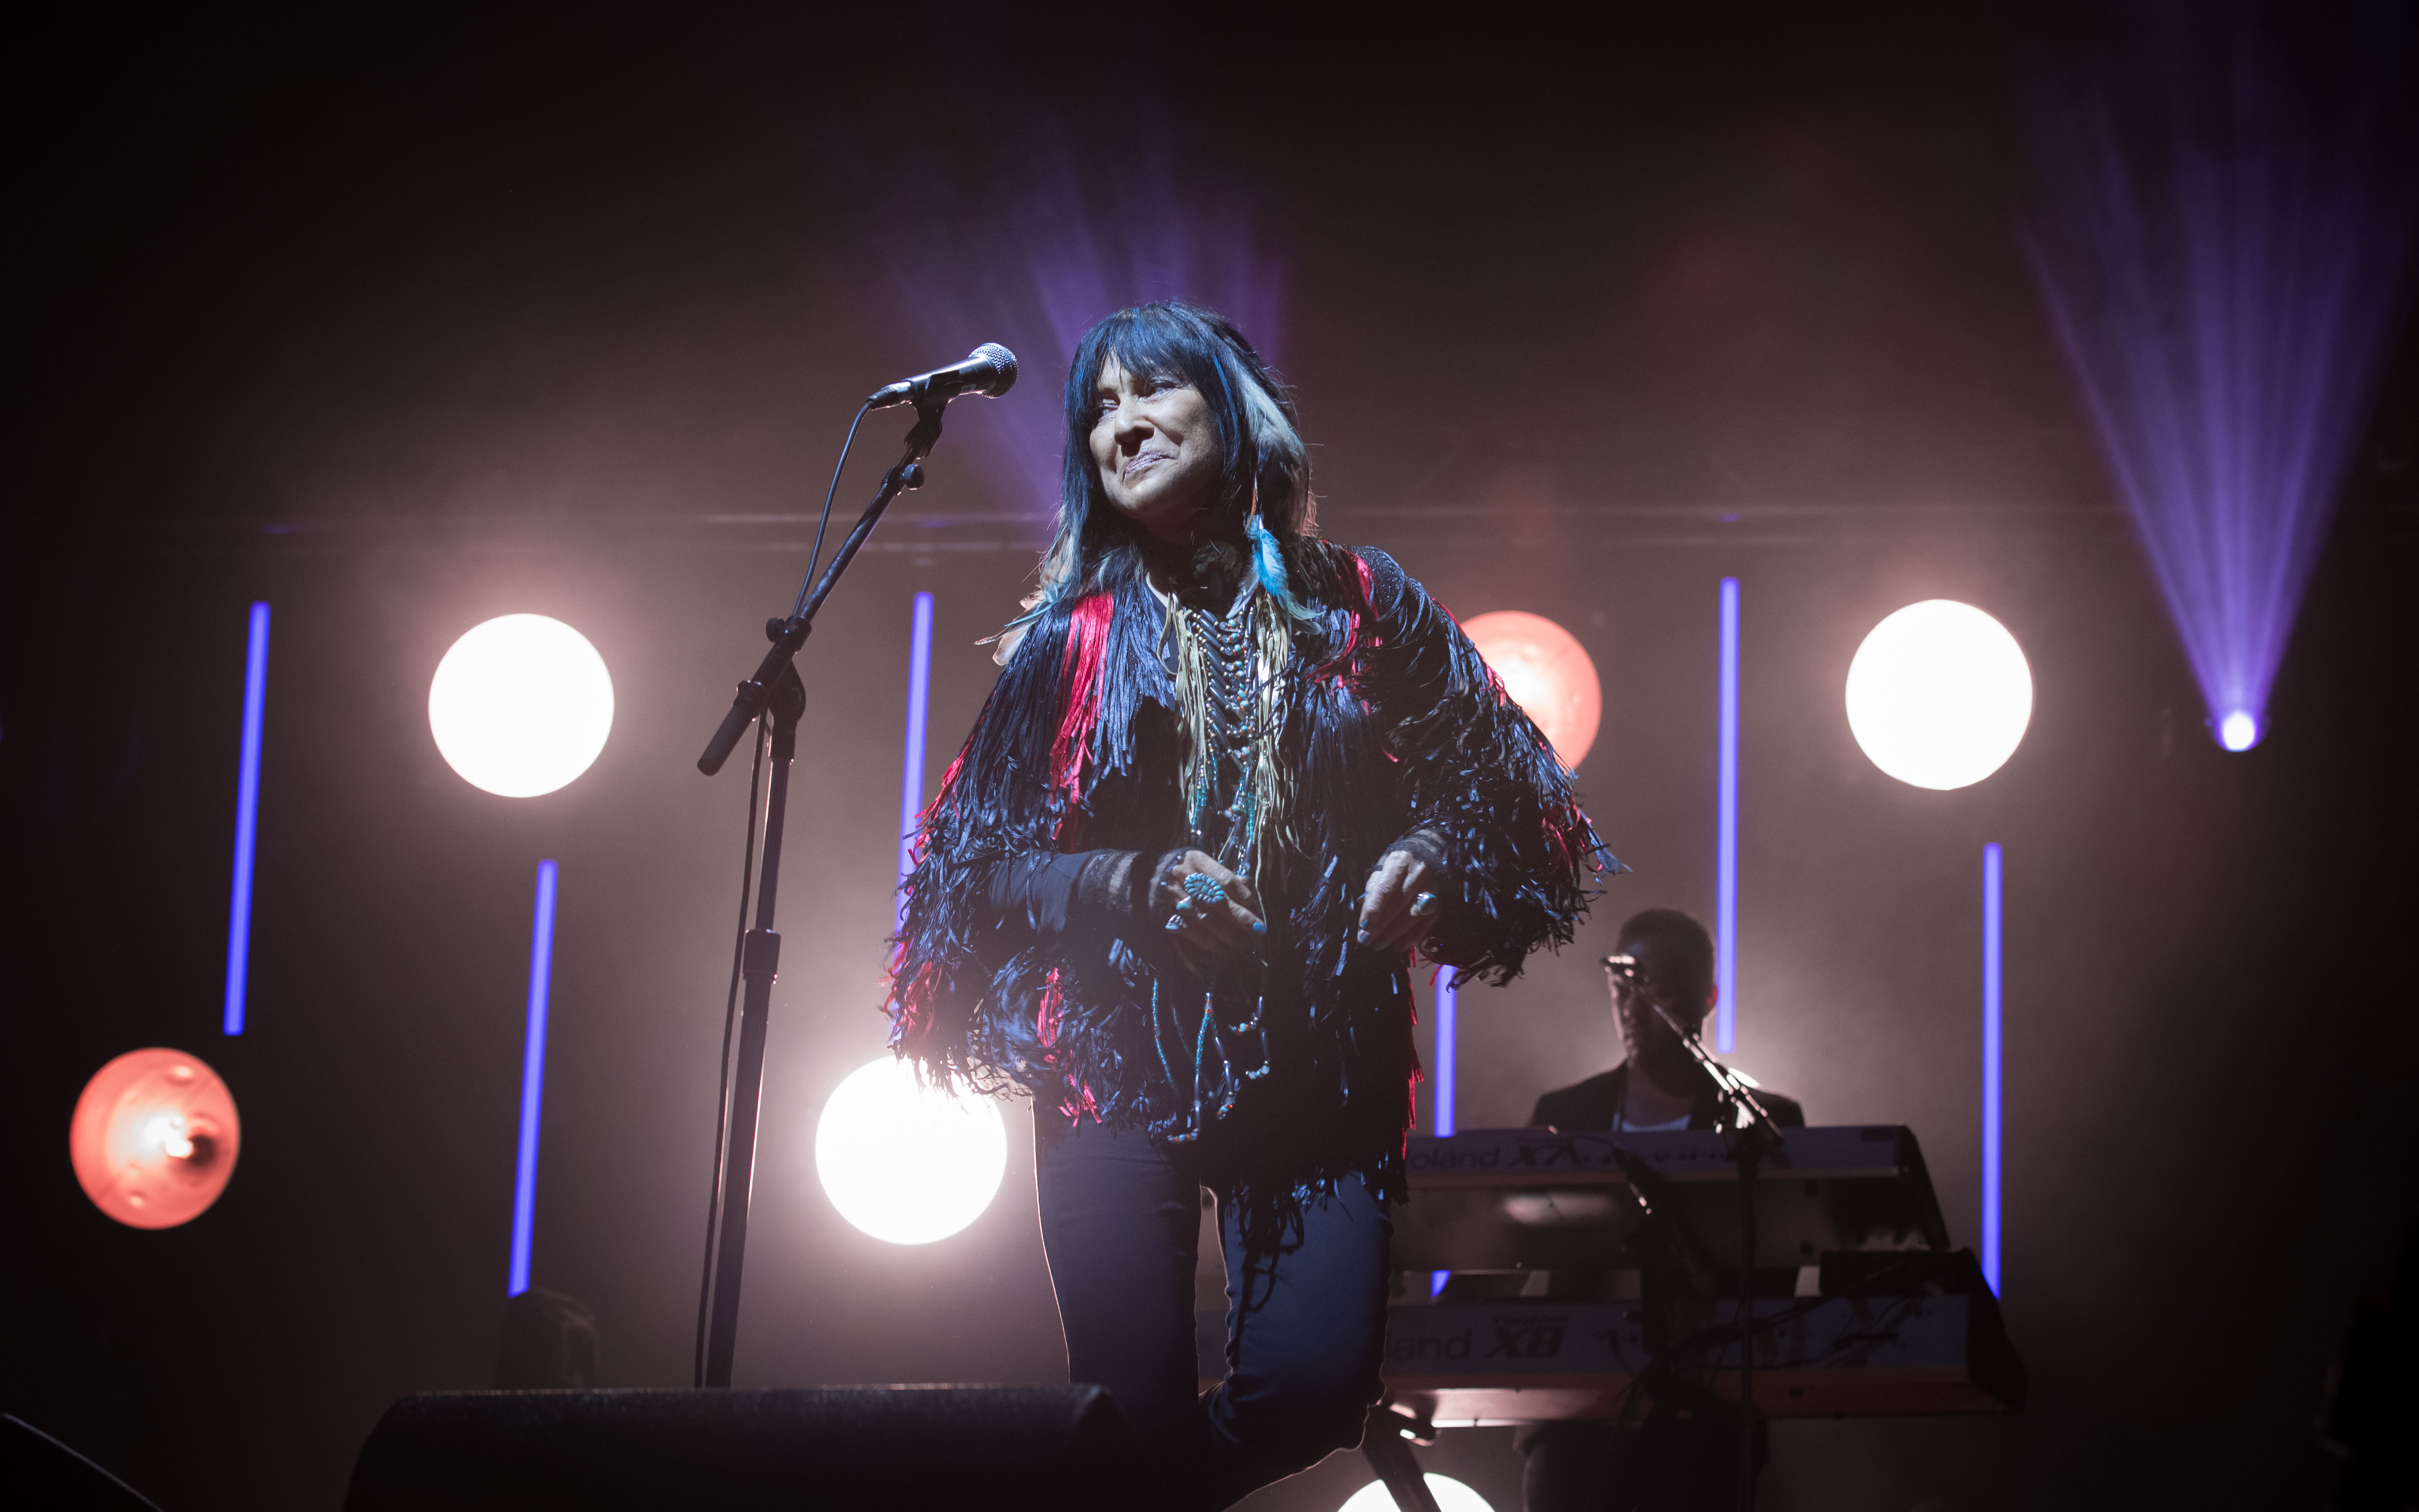 A woman with long hair, wearing a jacket with beads and fringe, stands on stage in front of a microphone